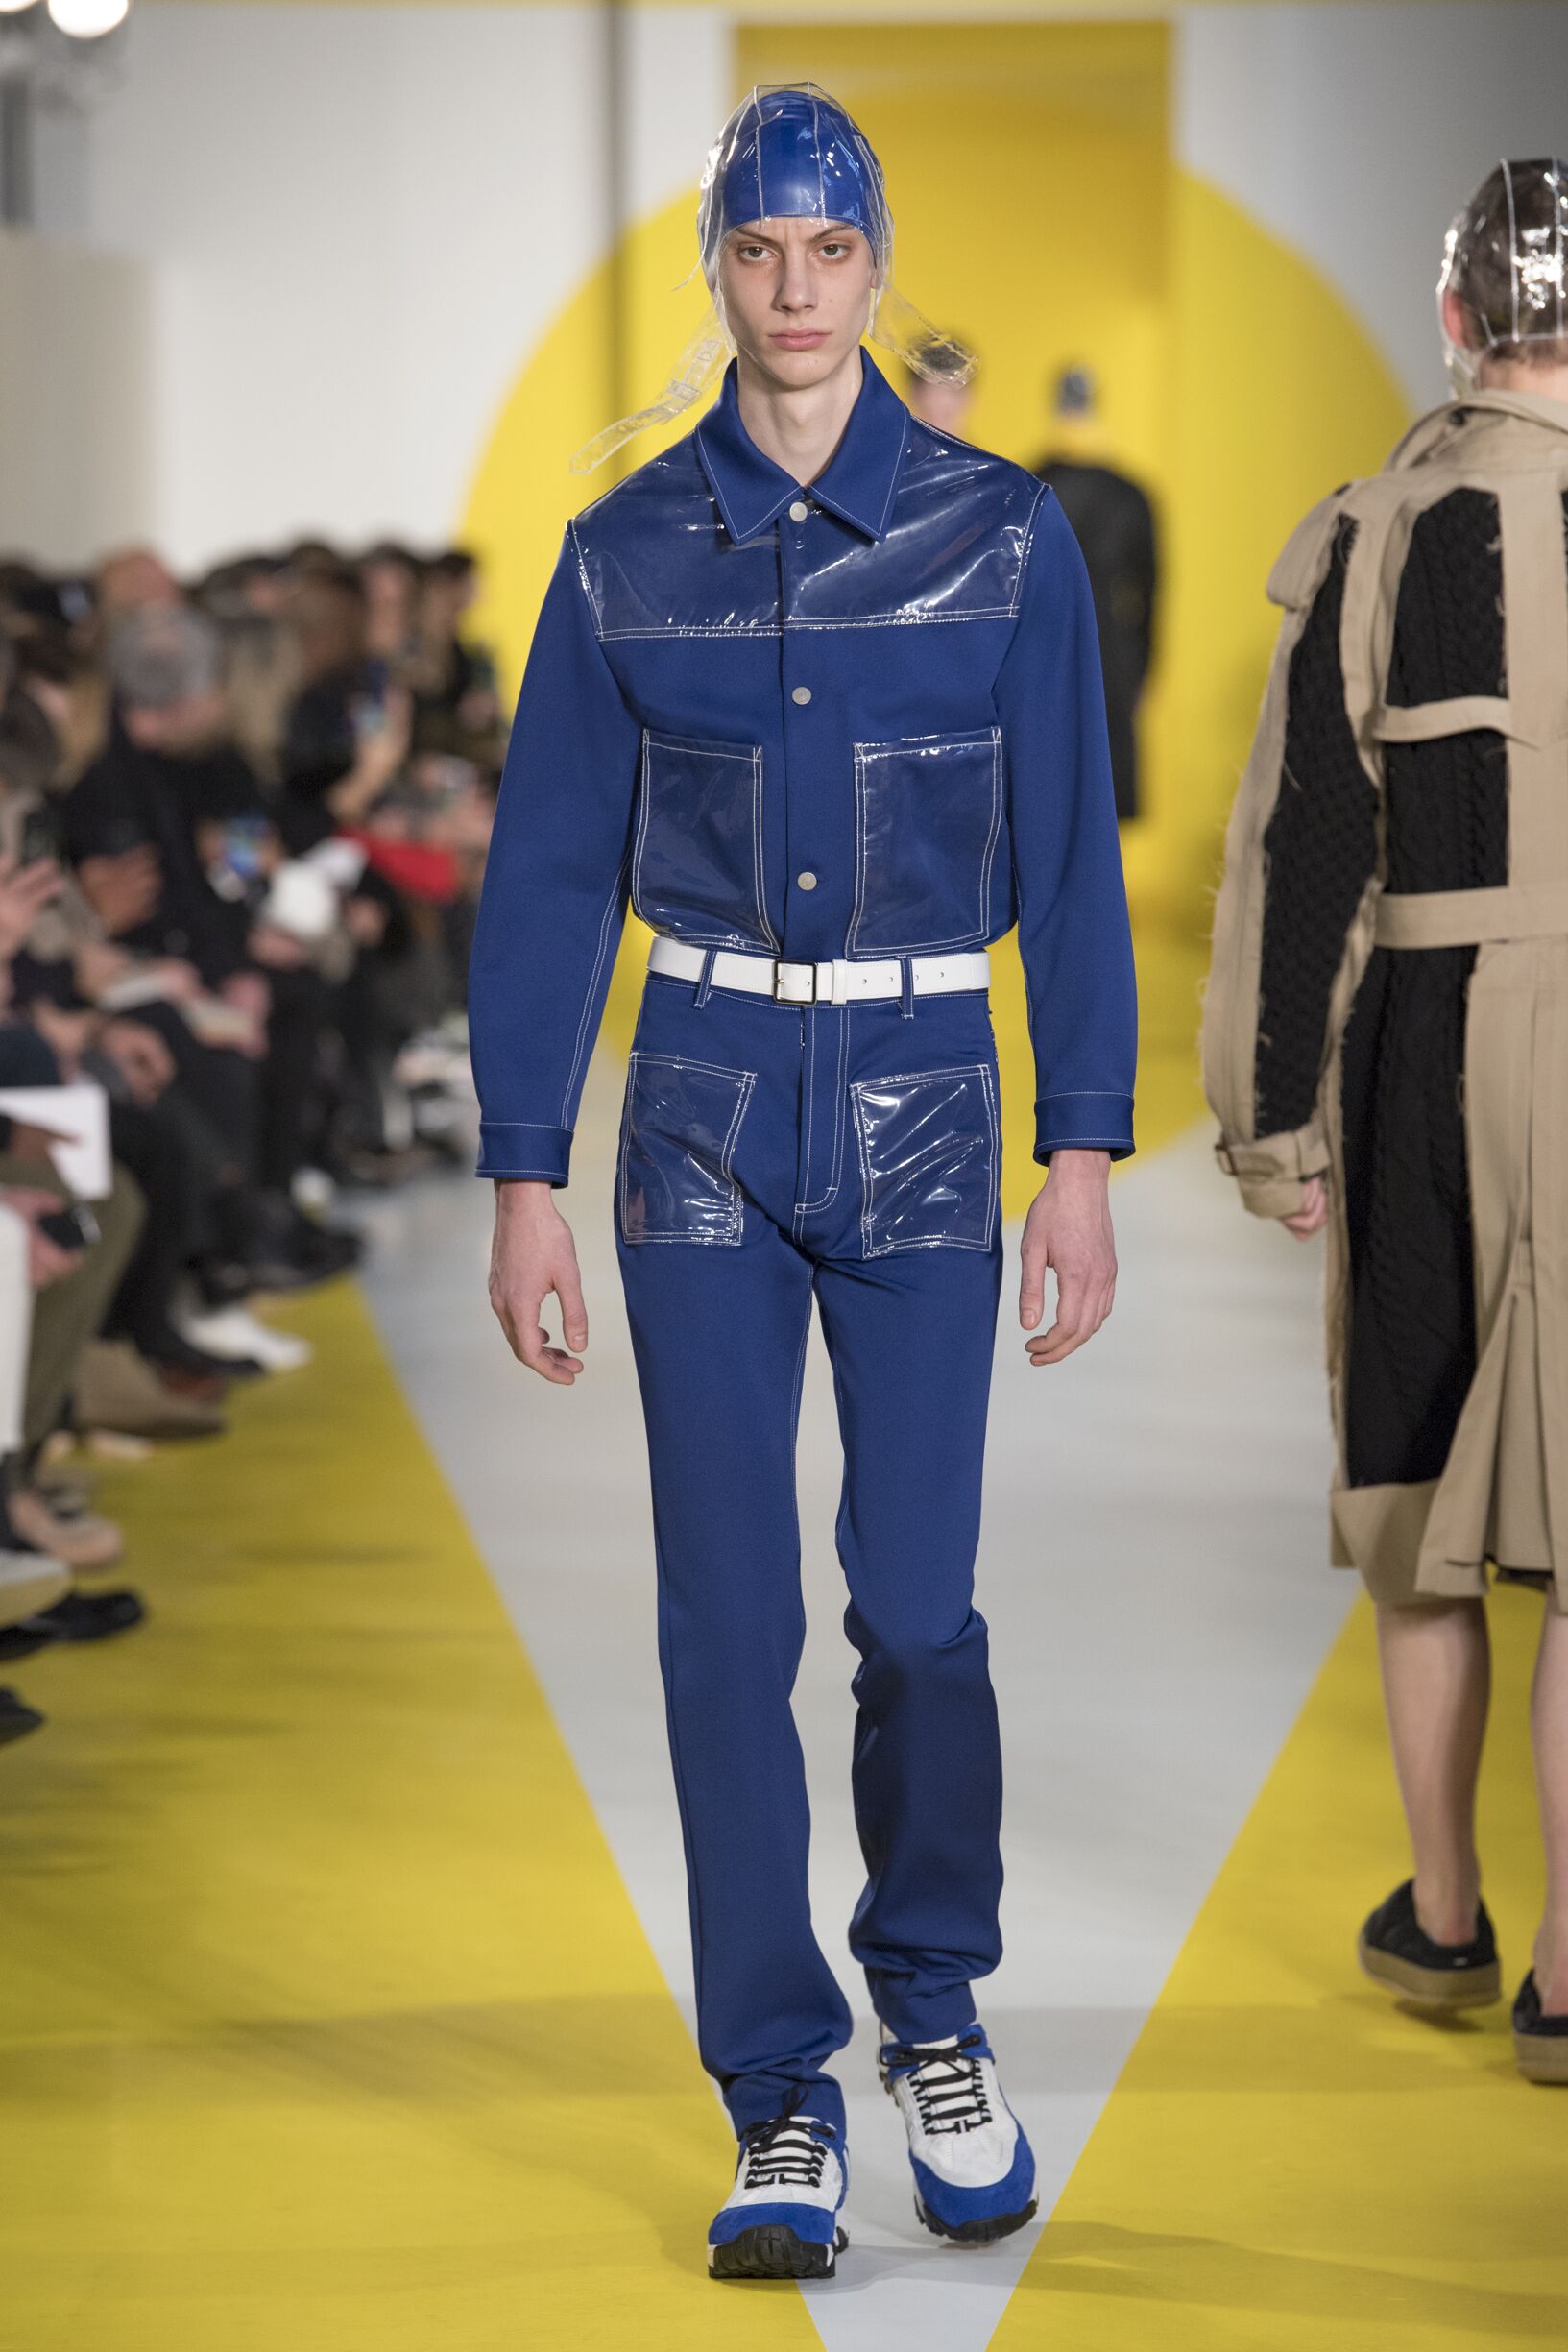 MAISON MARGIELA FALL WINTER 2018 MEN’S COLLECTION | The Skinny Beep